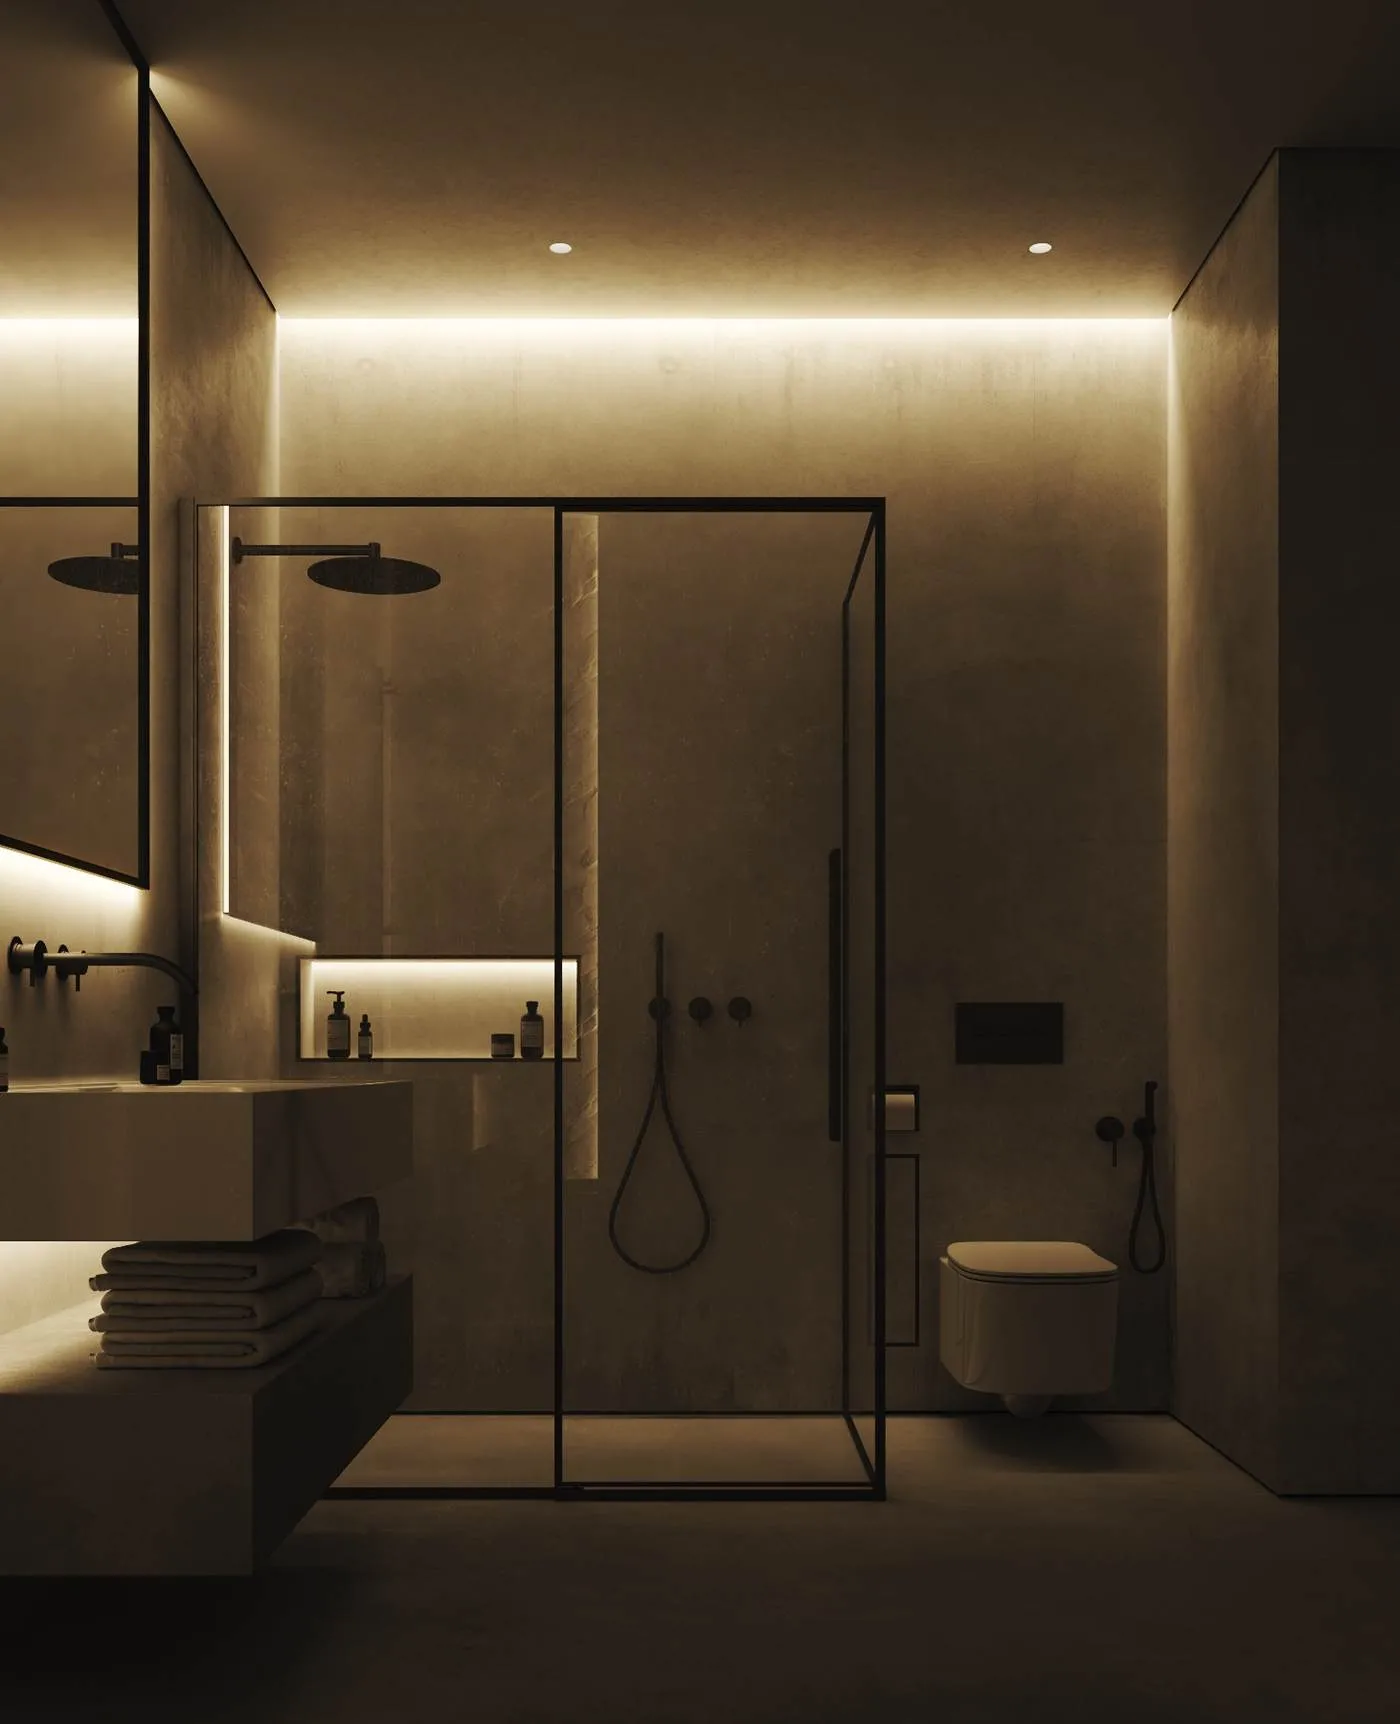 ceiling lights in a bathroom with toilet and shower